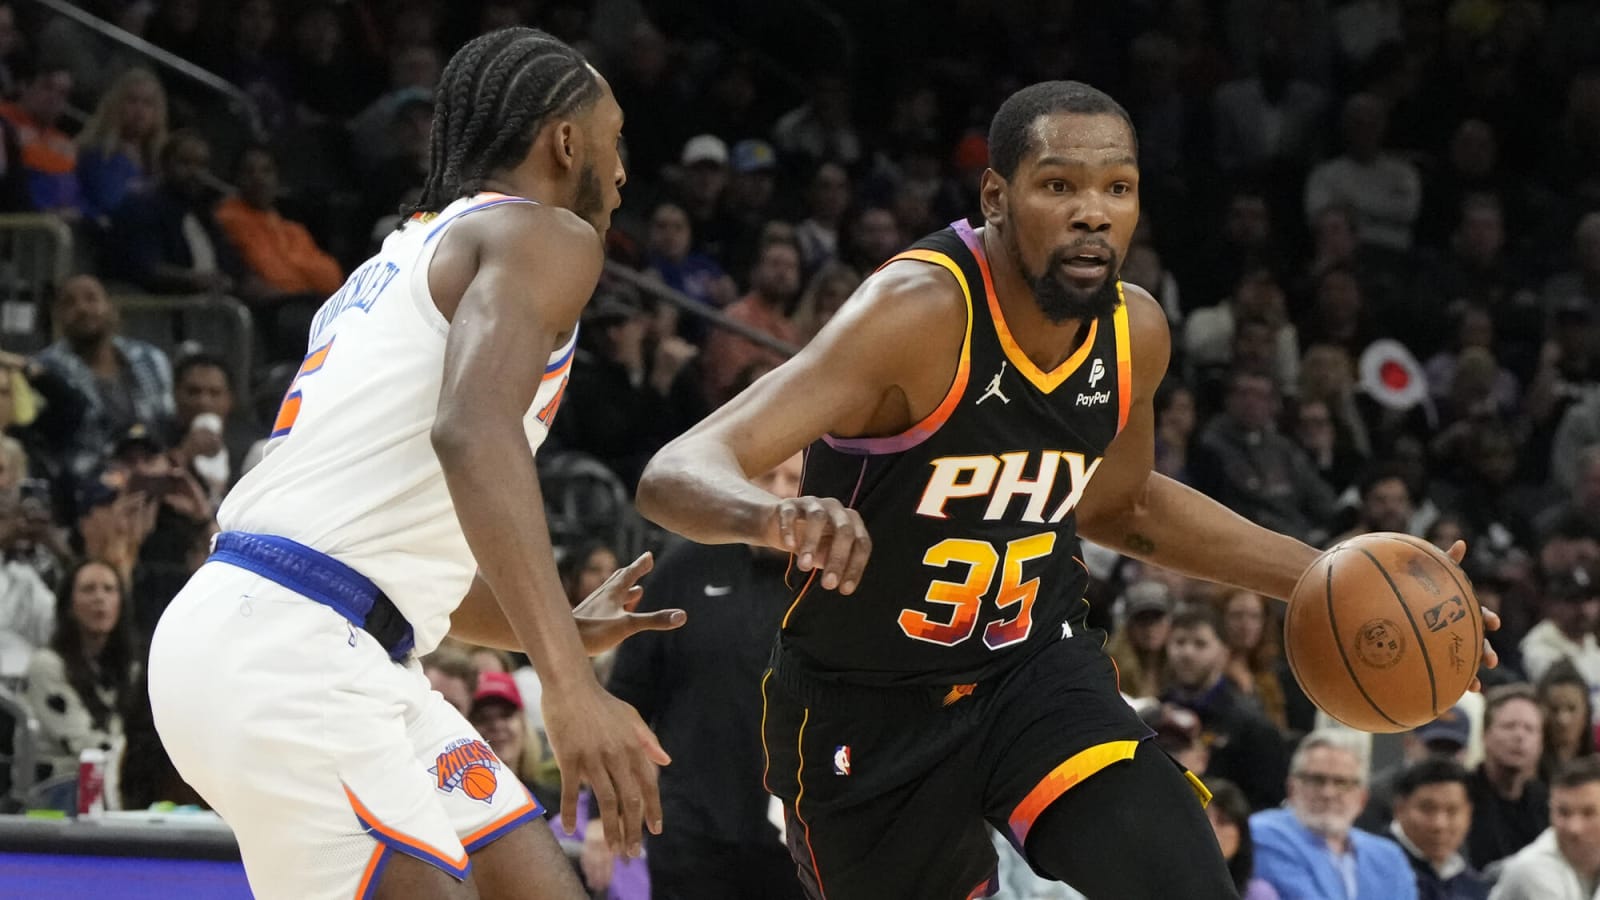 Suns allow season-high 139 points, sparking Durant’s frustration